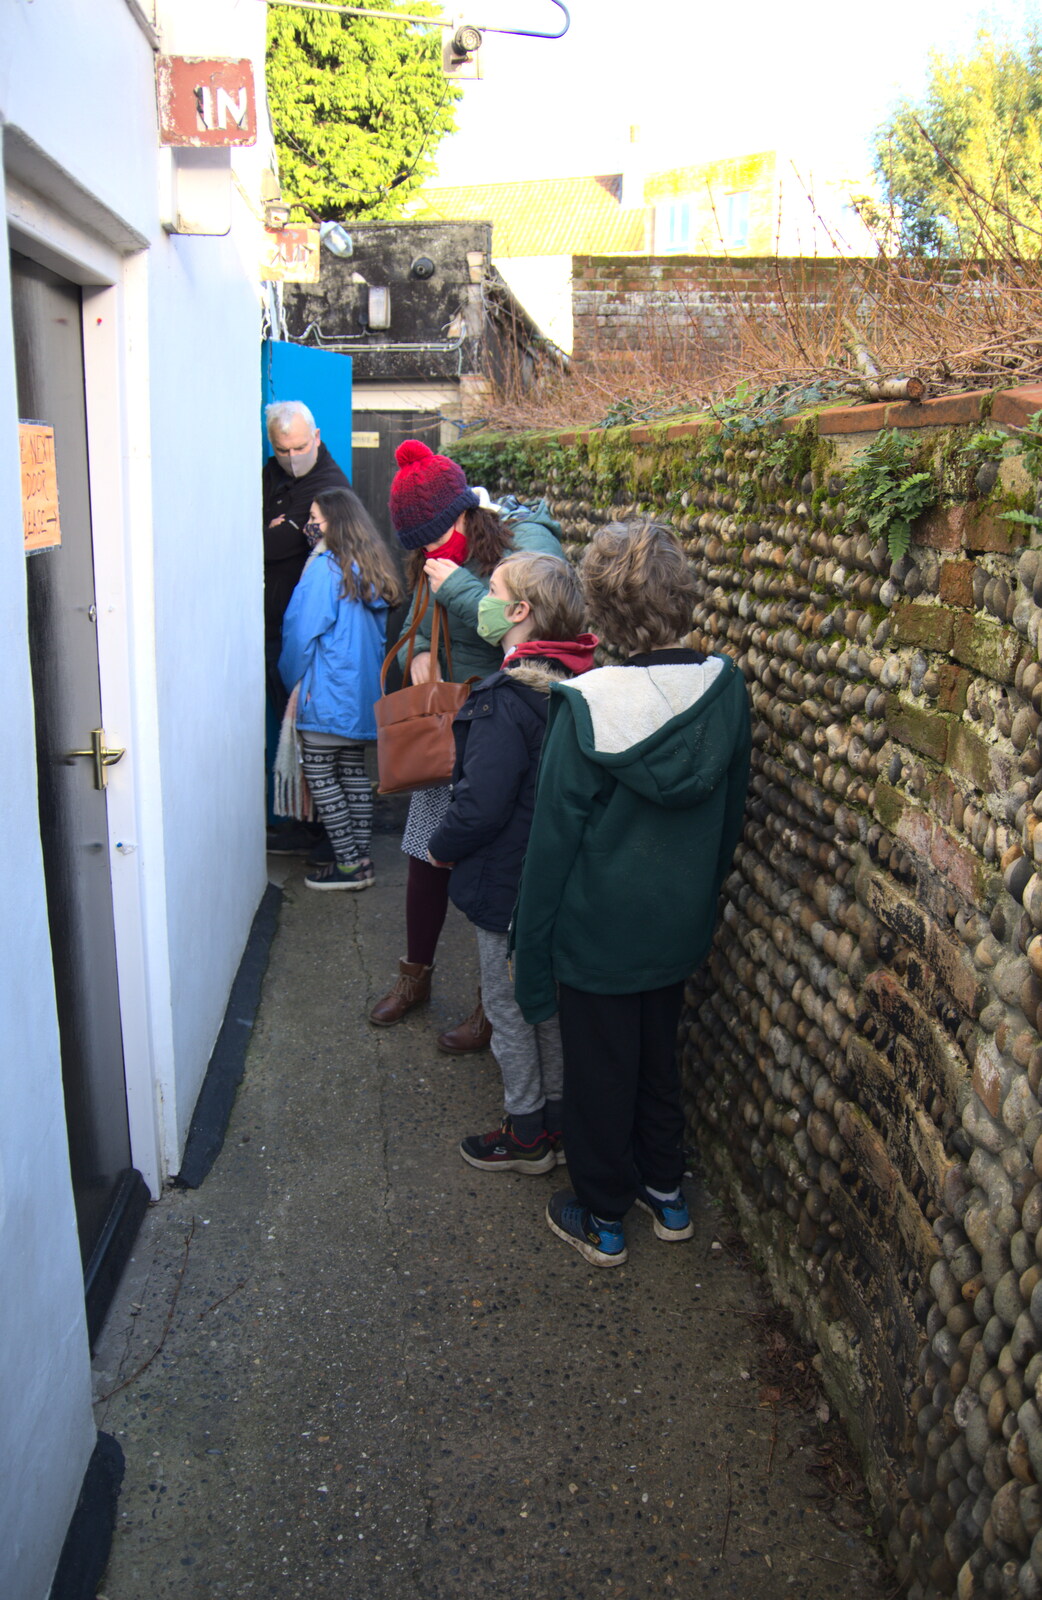 We queue up for fish and chips at Mark's from A Return to the Beach, Southwold, Suffolk - 20th December 2020